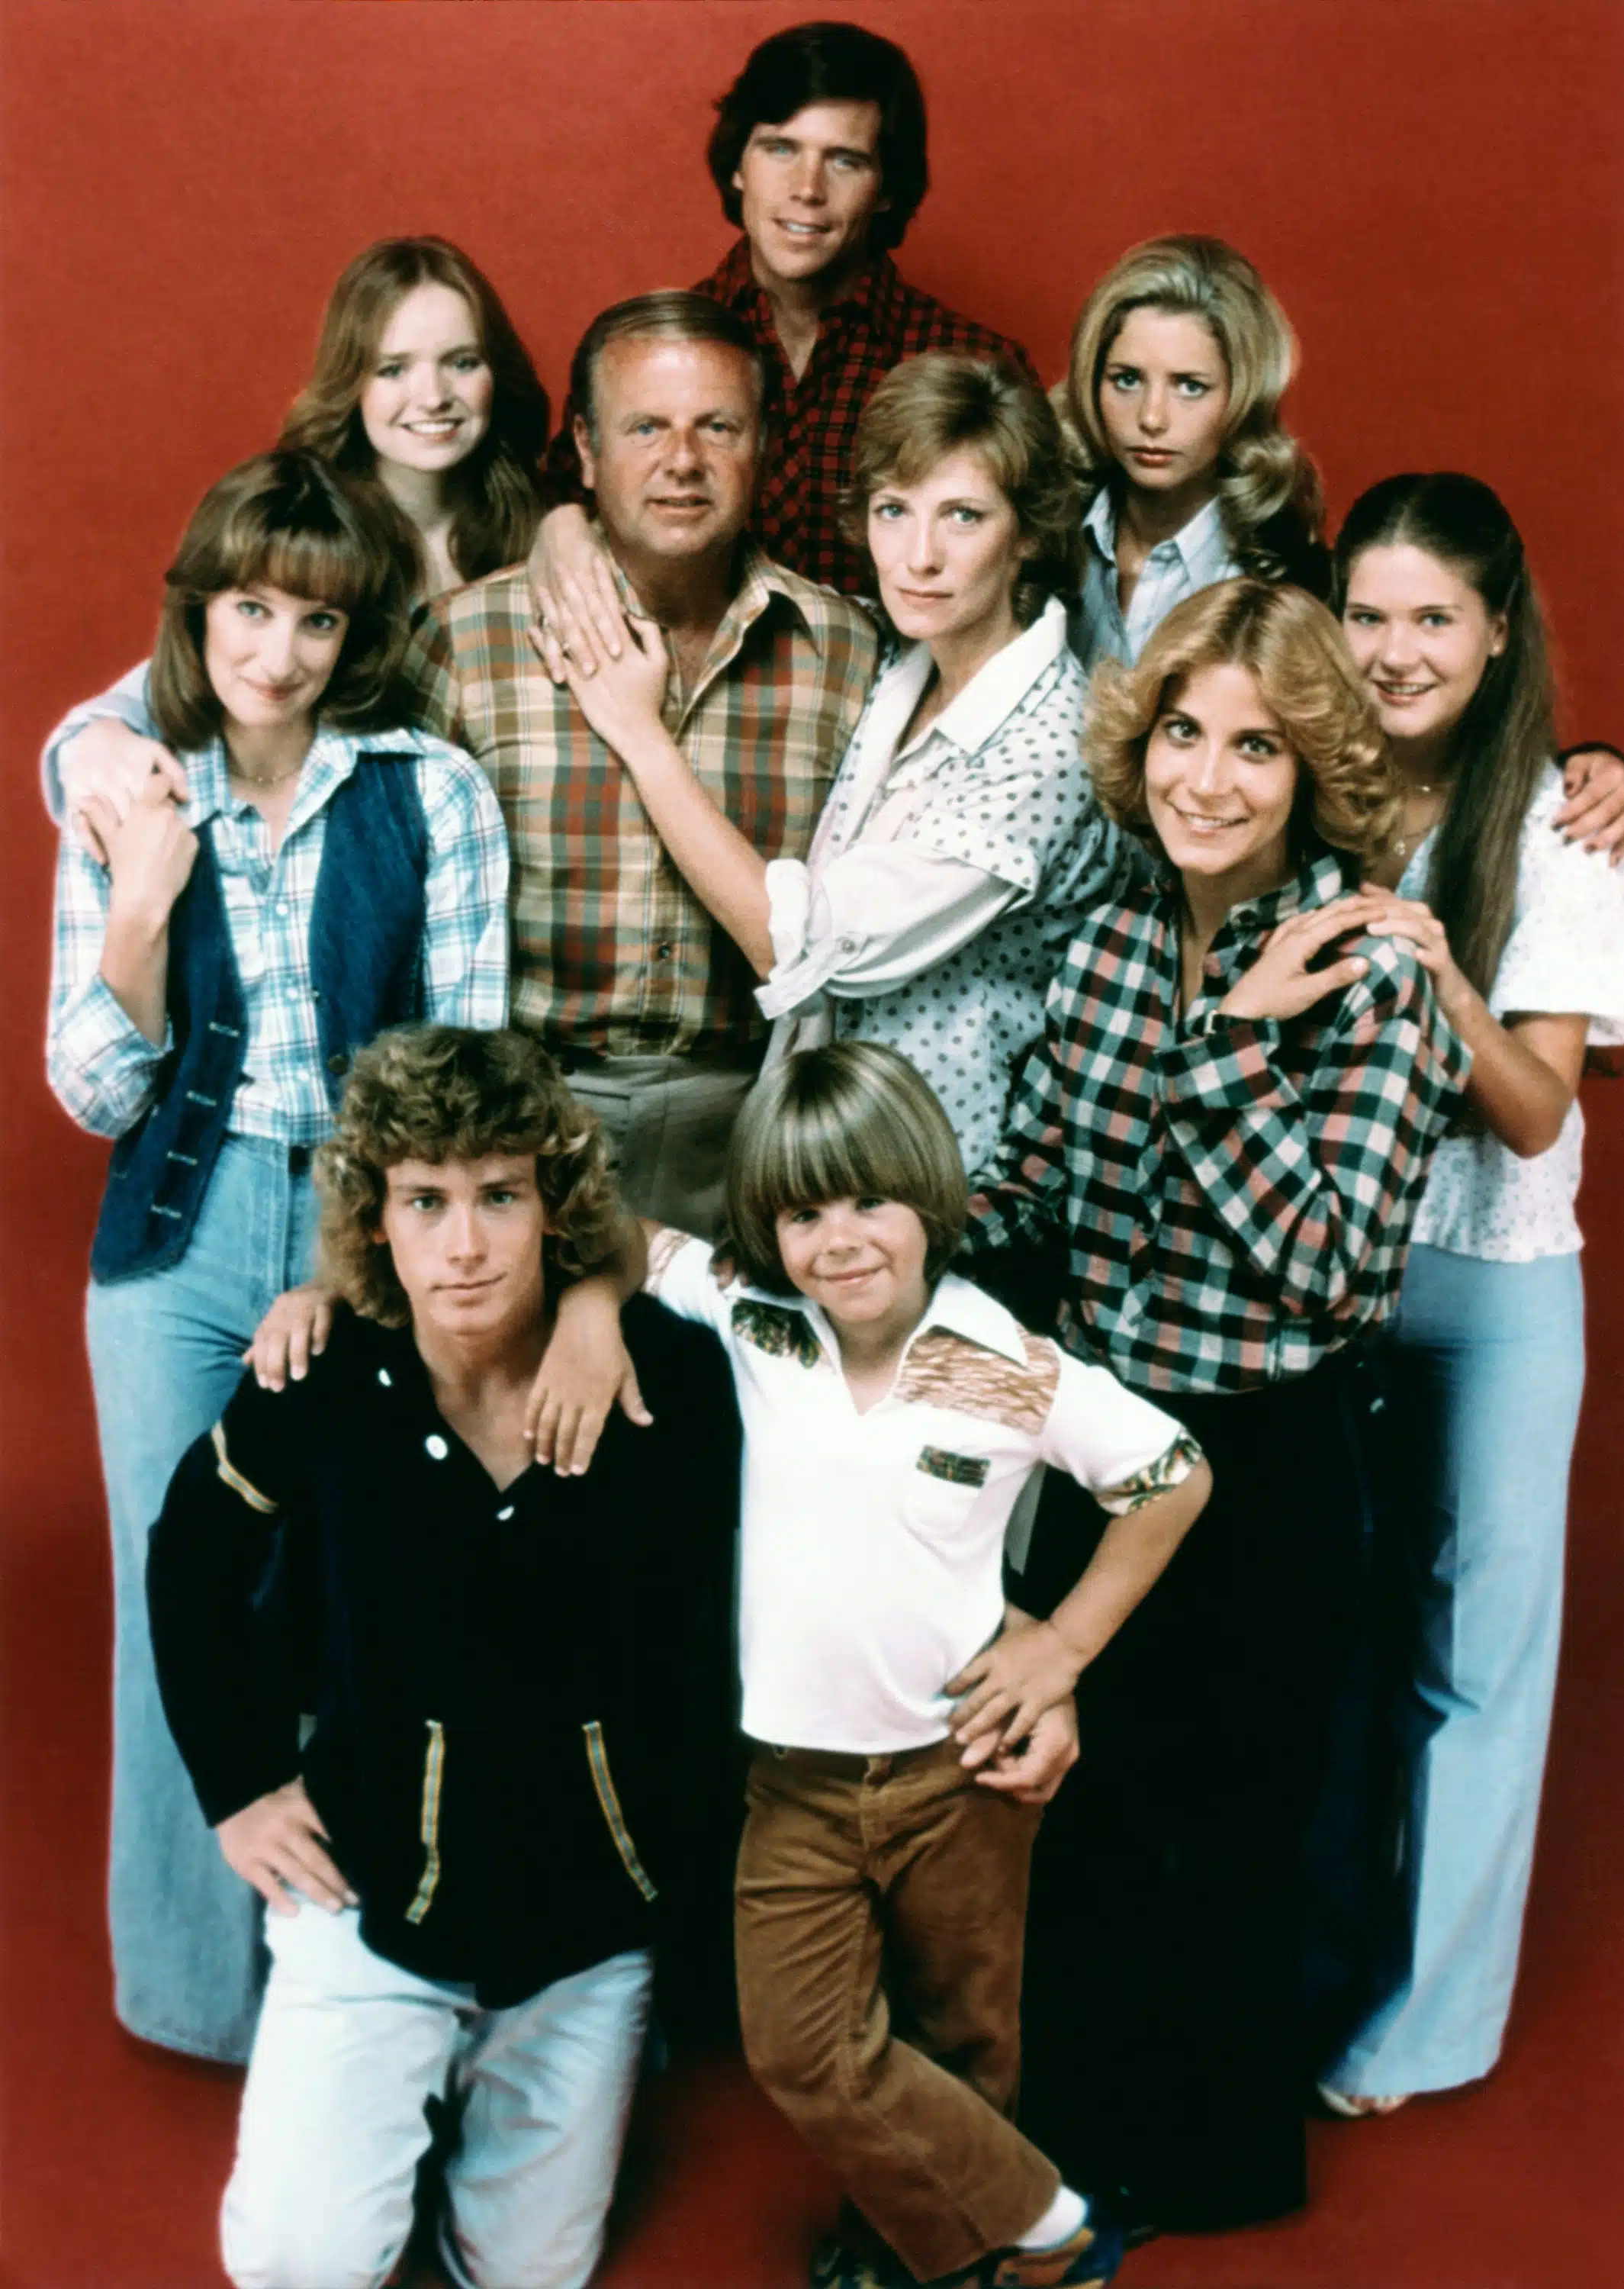 EIGHT IS ENOUGH, (back row, from left): Susan Richardson, Grant Goodeve, Dianne Kay, (center): Laurie Walters, Dick Van Patten, Betty Buckley, Connie Newton, (front): Willie Aames, Adam Rich, Lani O'Grady, 1977-81 